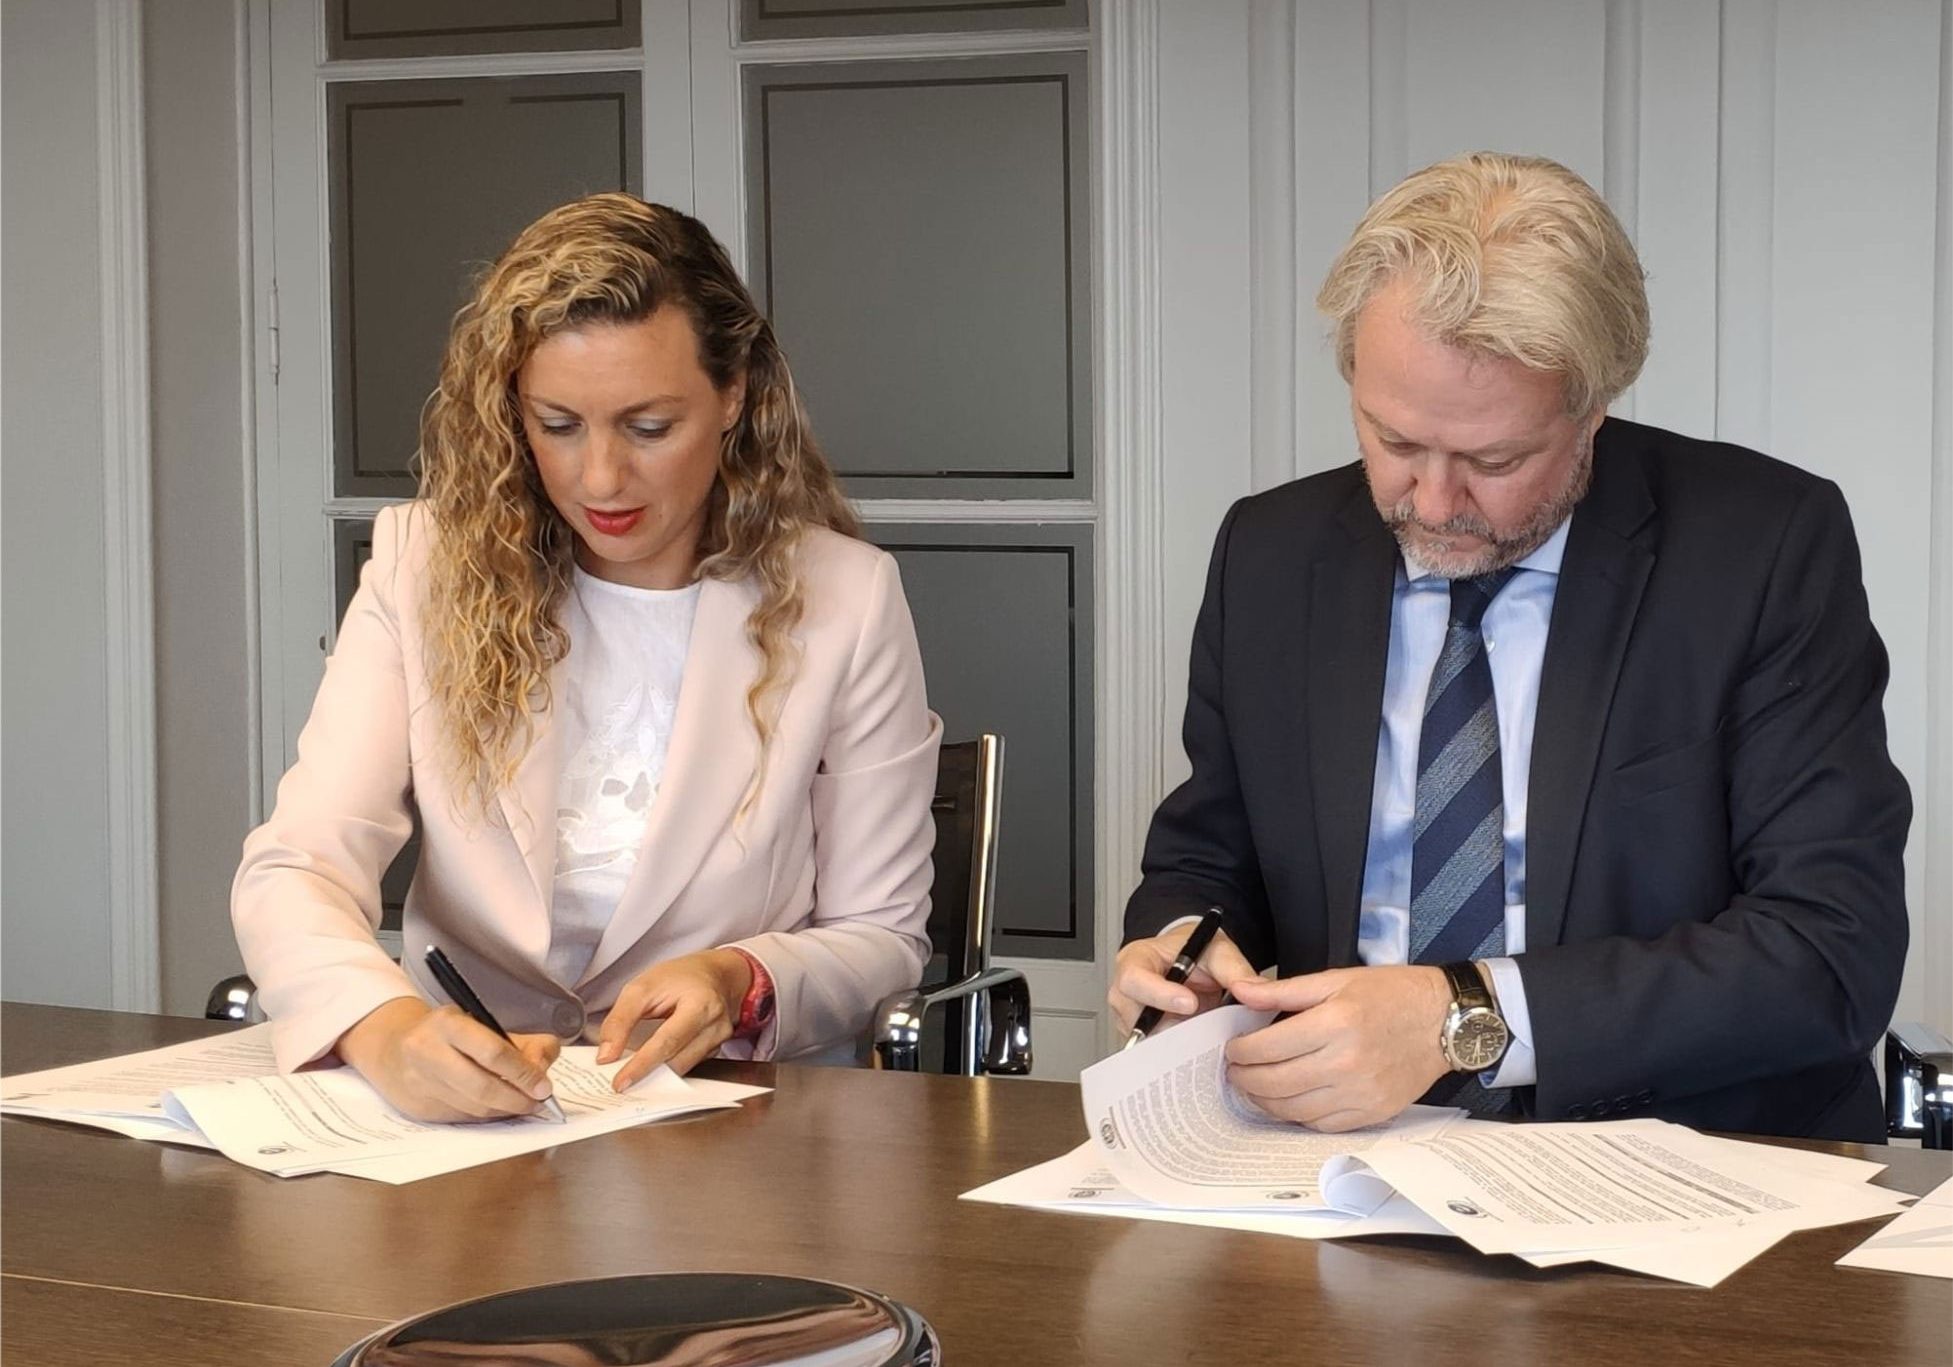 Ruth Ballesteros Gómez, Managing Director at Bureau Veritas Training Spain and Bruno Masier, President of the World Trade Point Federation, sign the agreement.